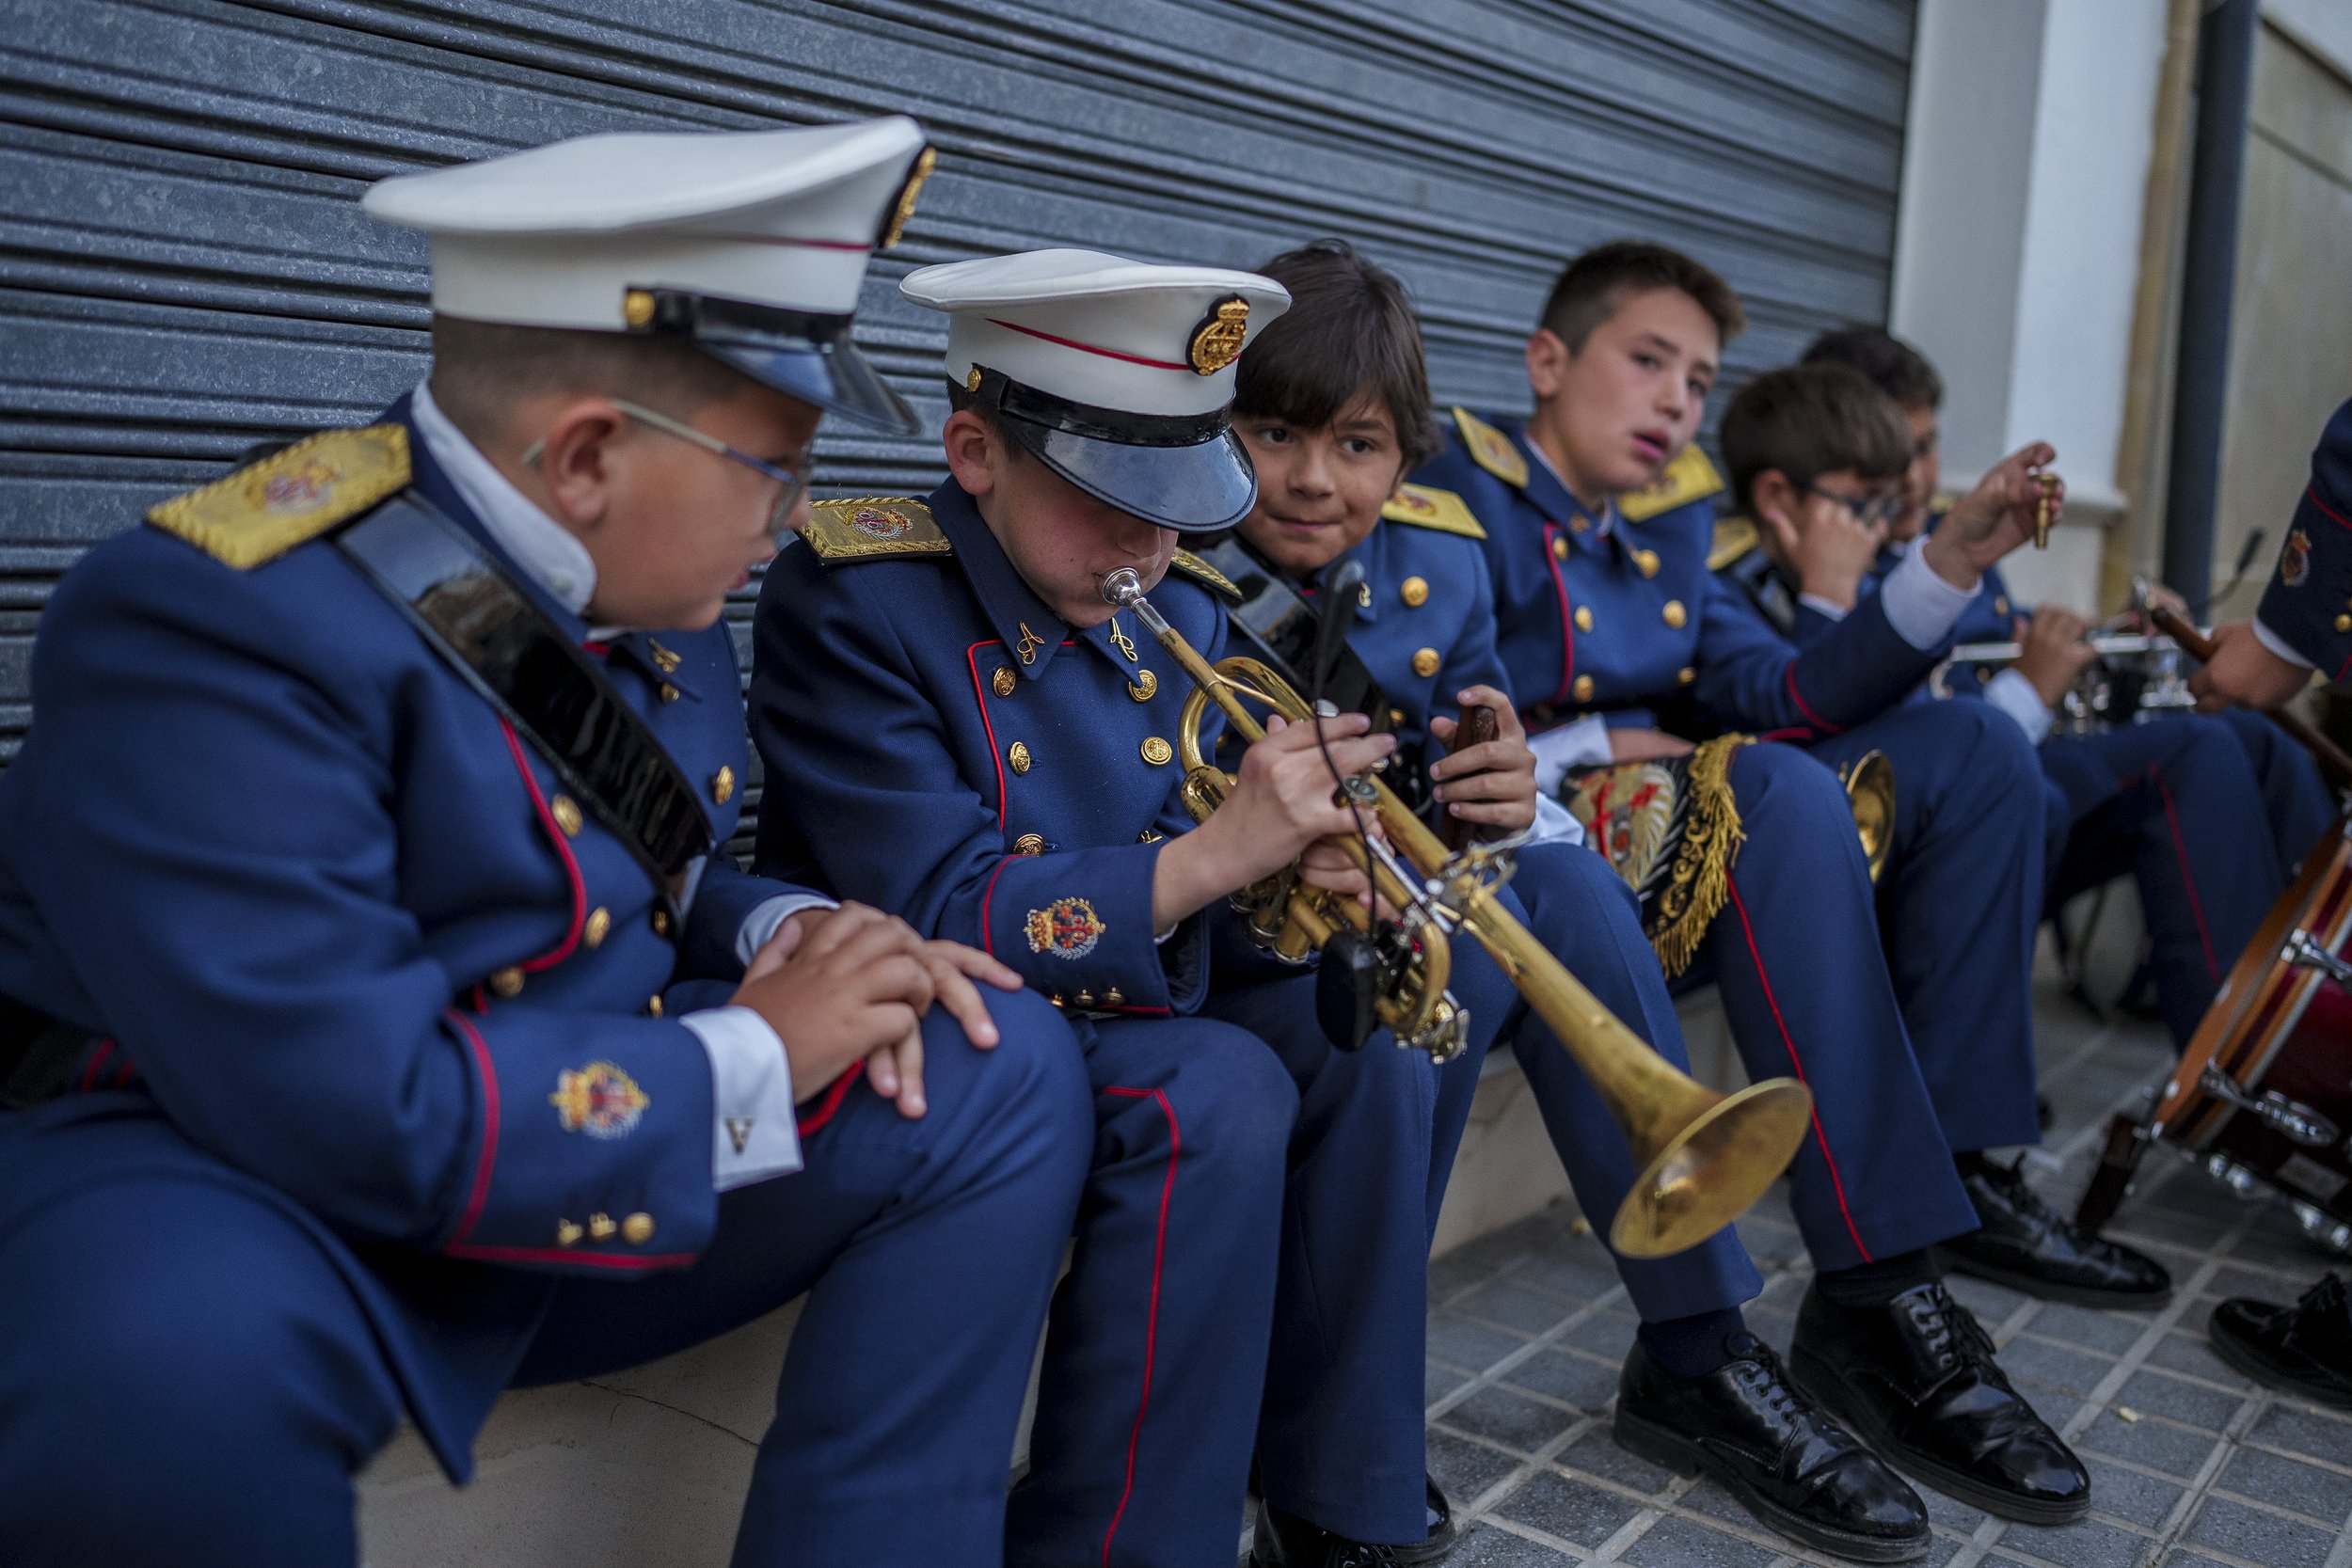  Members of the band practice prior to the procession at the Veracruz church in Aguilar de la Frontera, Spain, on April 4, 2023. (AP Photo/Manu Fernandez) 